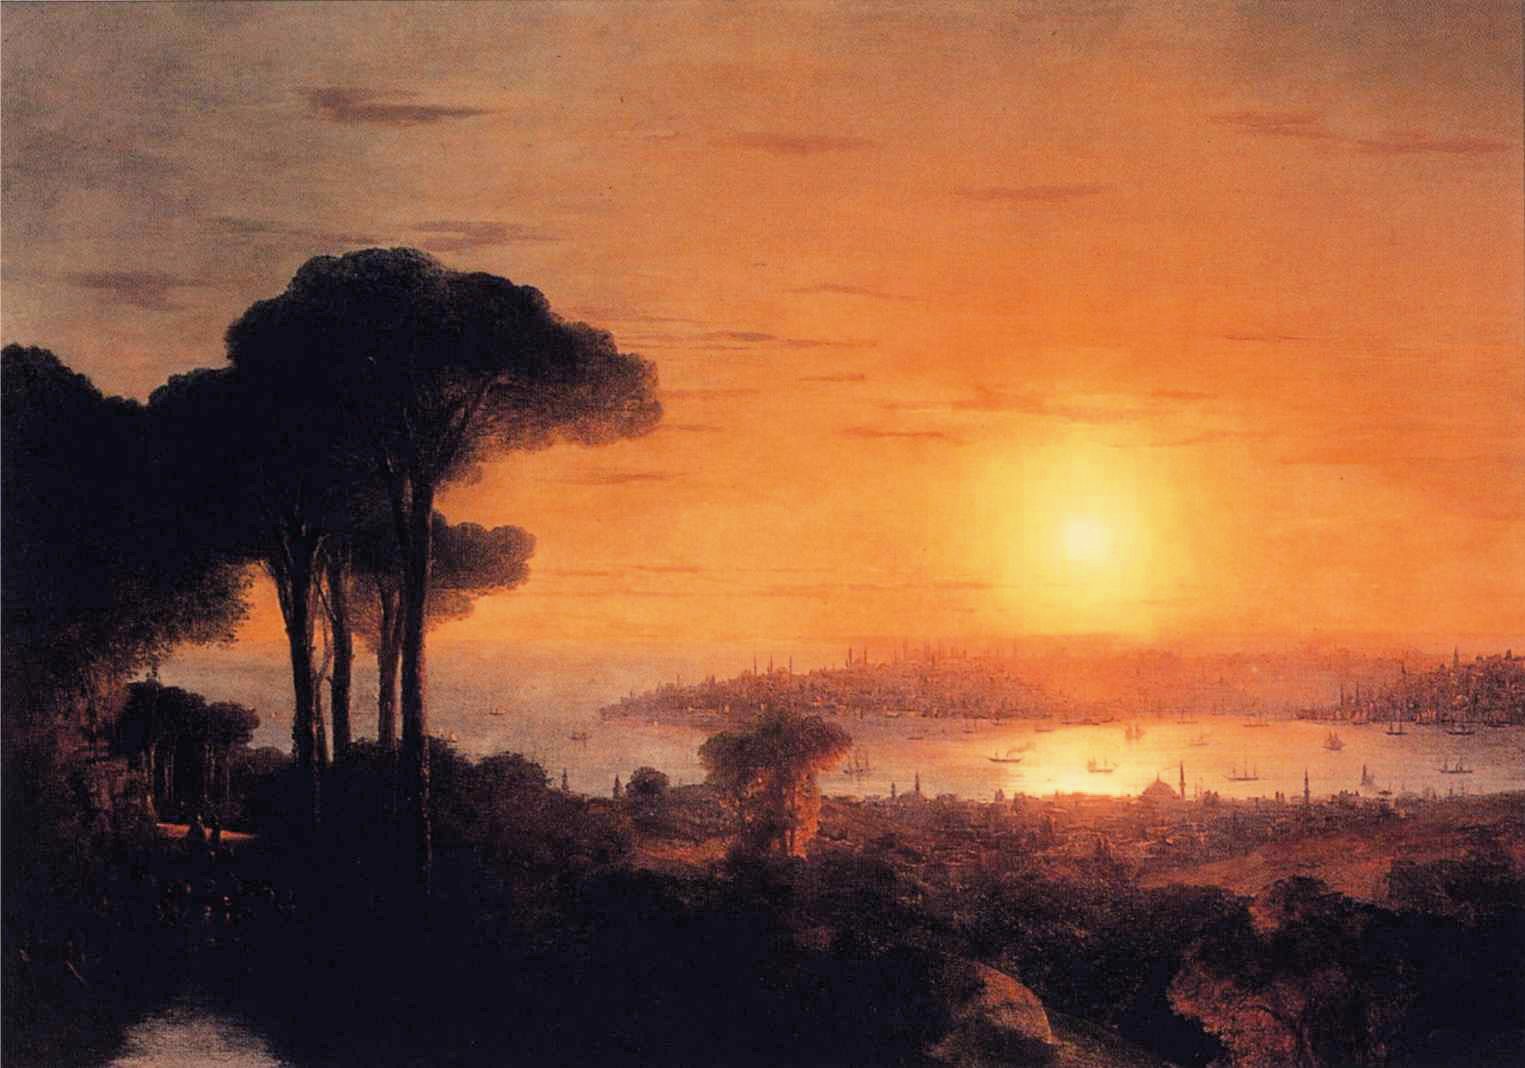 "Sunset Over the Golden Horn," by Ivan Constantinovich Aivazovsky, from 1866.